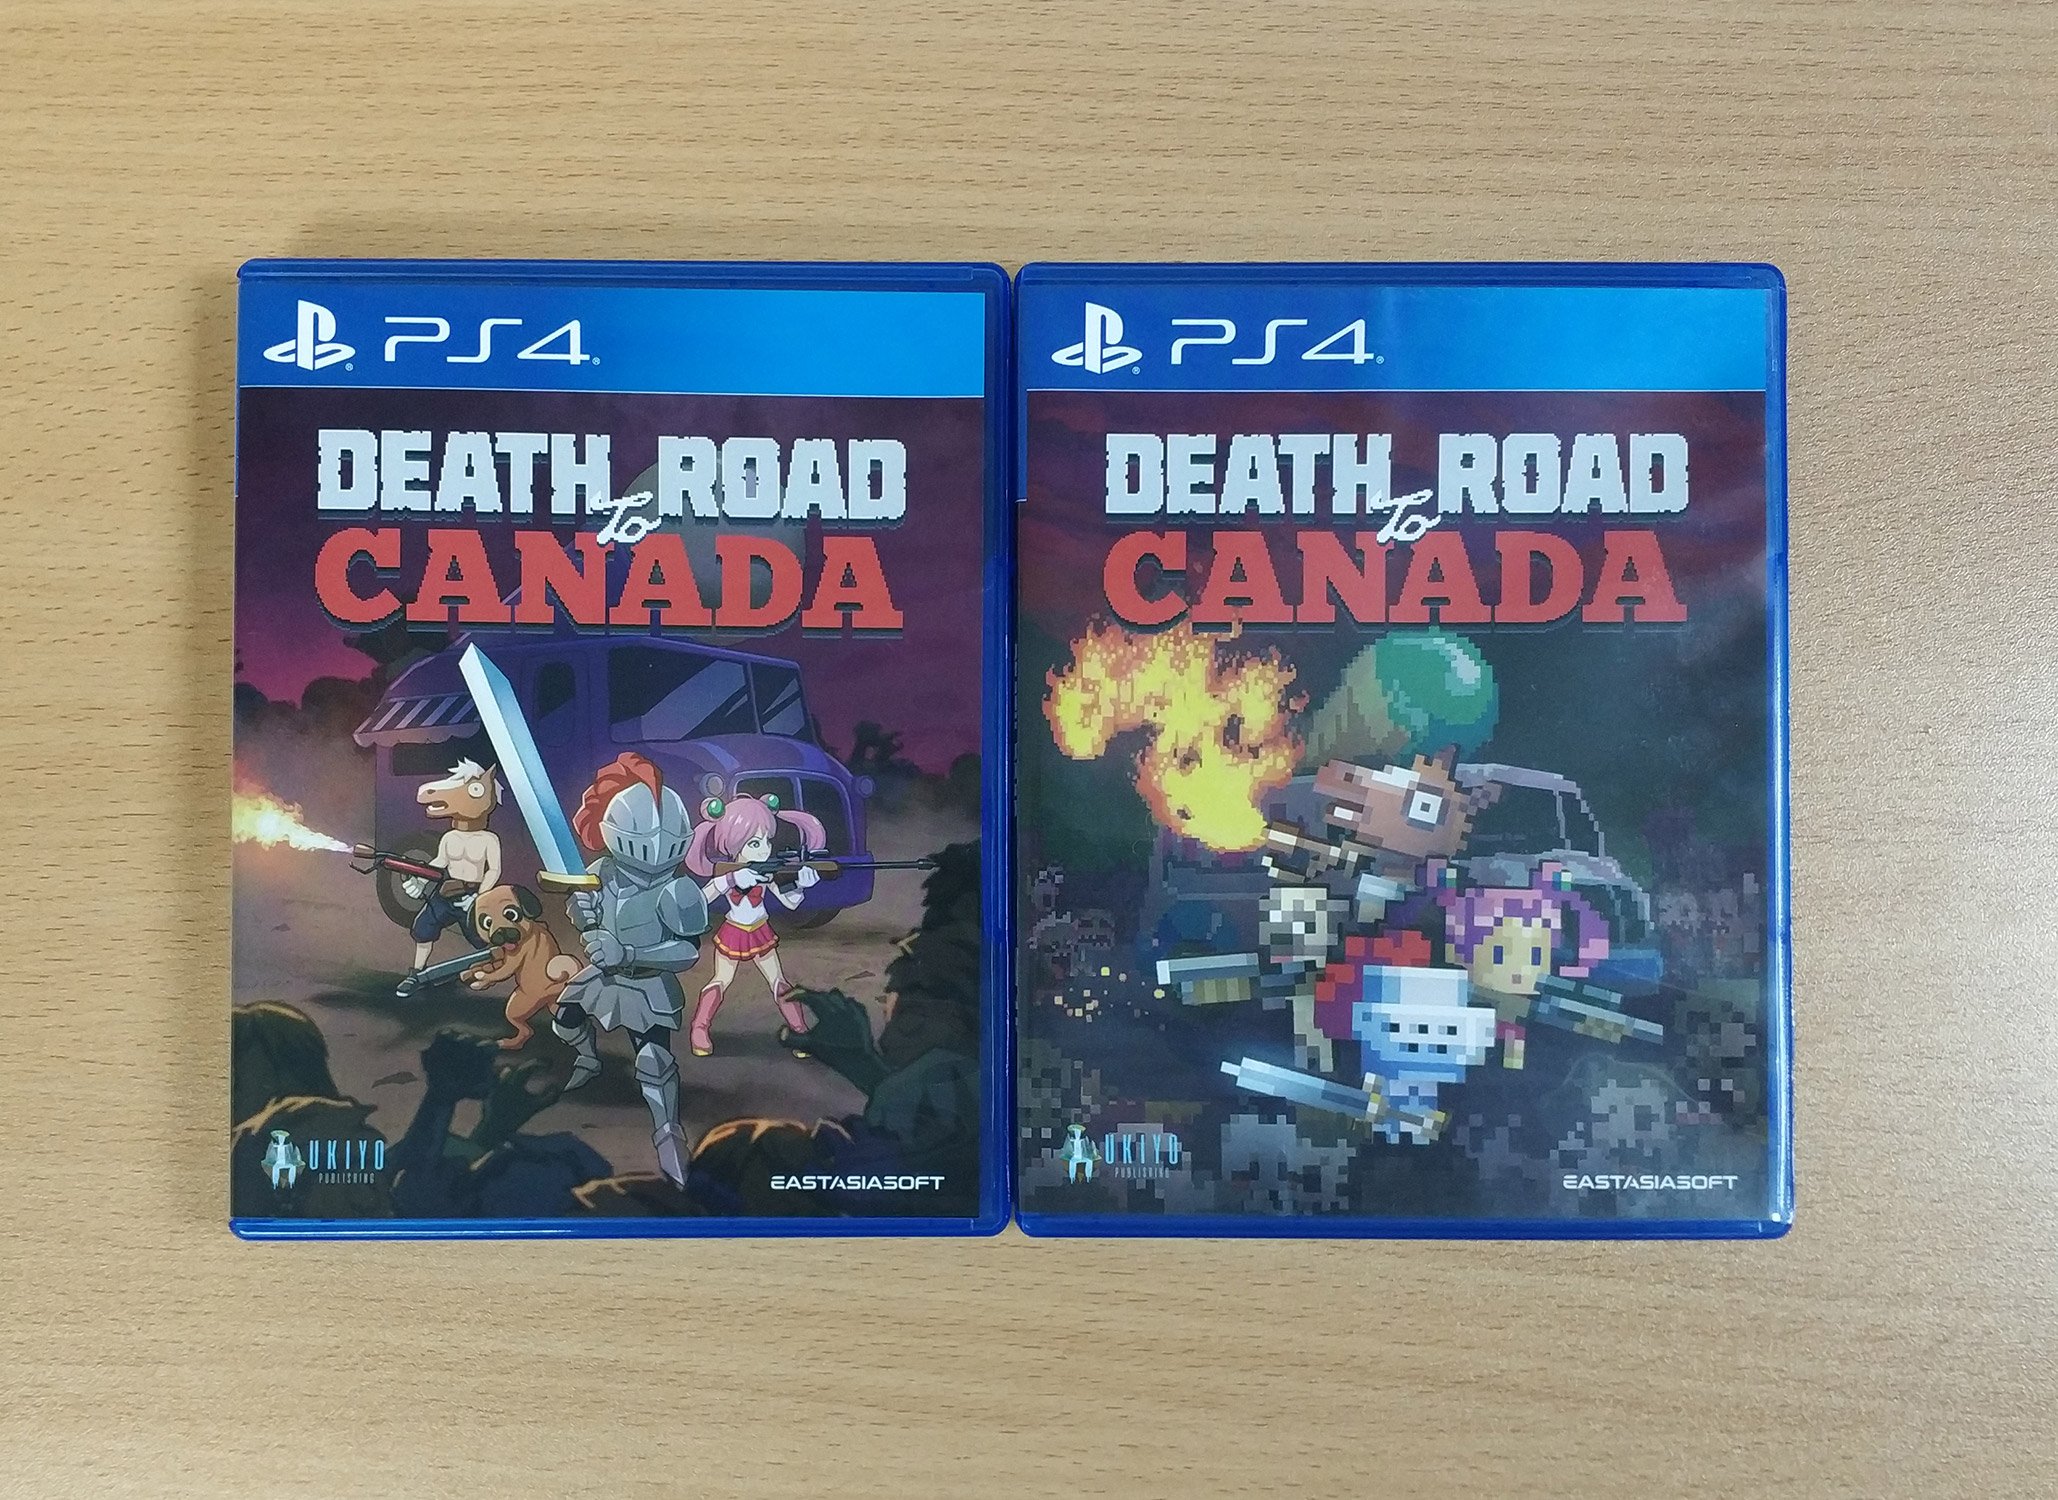 Jurassic Park pedicab Enlighten eastasiasoft on Twitter: "Death Road to Canada PS4 reverse cover art. Left  = original, right = reverse. Which one do you prefer?  https://t.co/lIF0sgGSzs" / Twitter